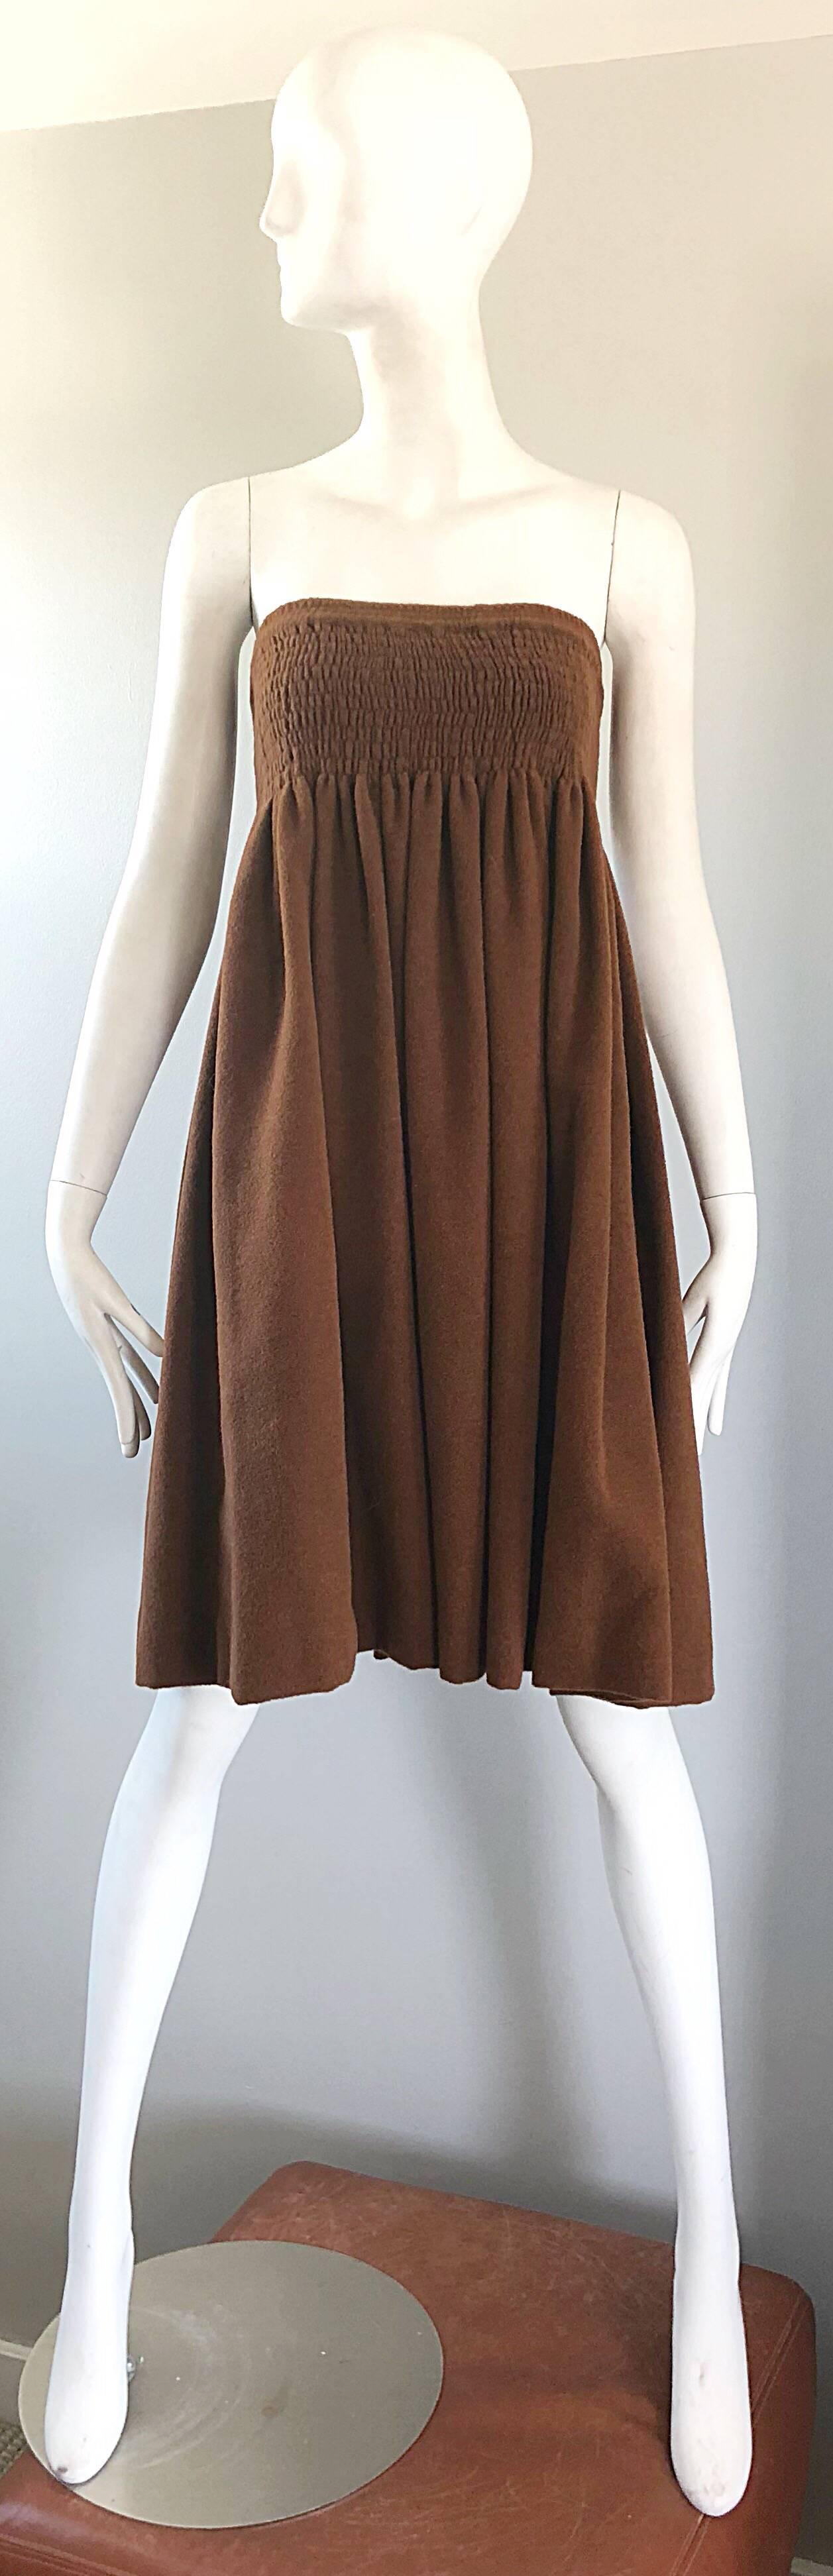 Vintage Yves Saint Laurent Russian Collection 1976 Jacket and Skirt Suit YSL 70s For Sale 4